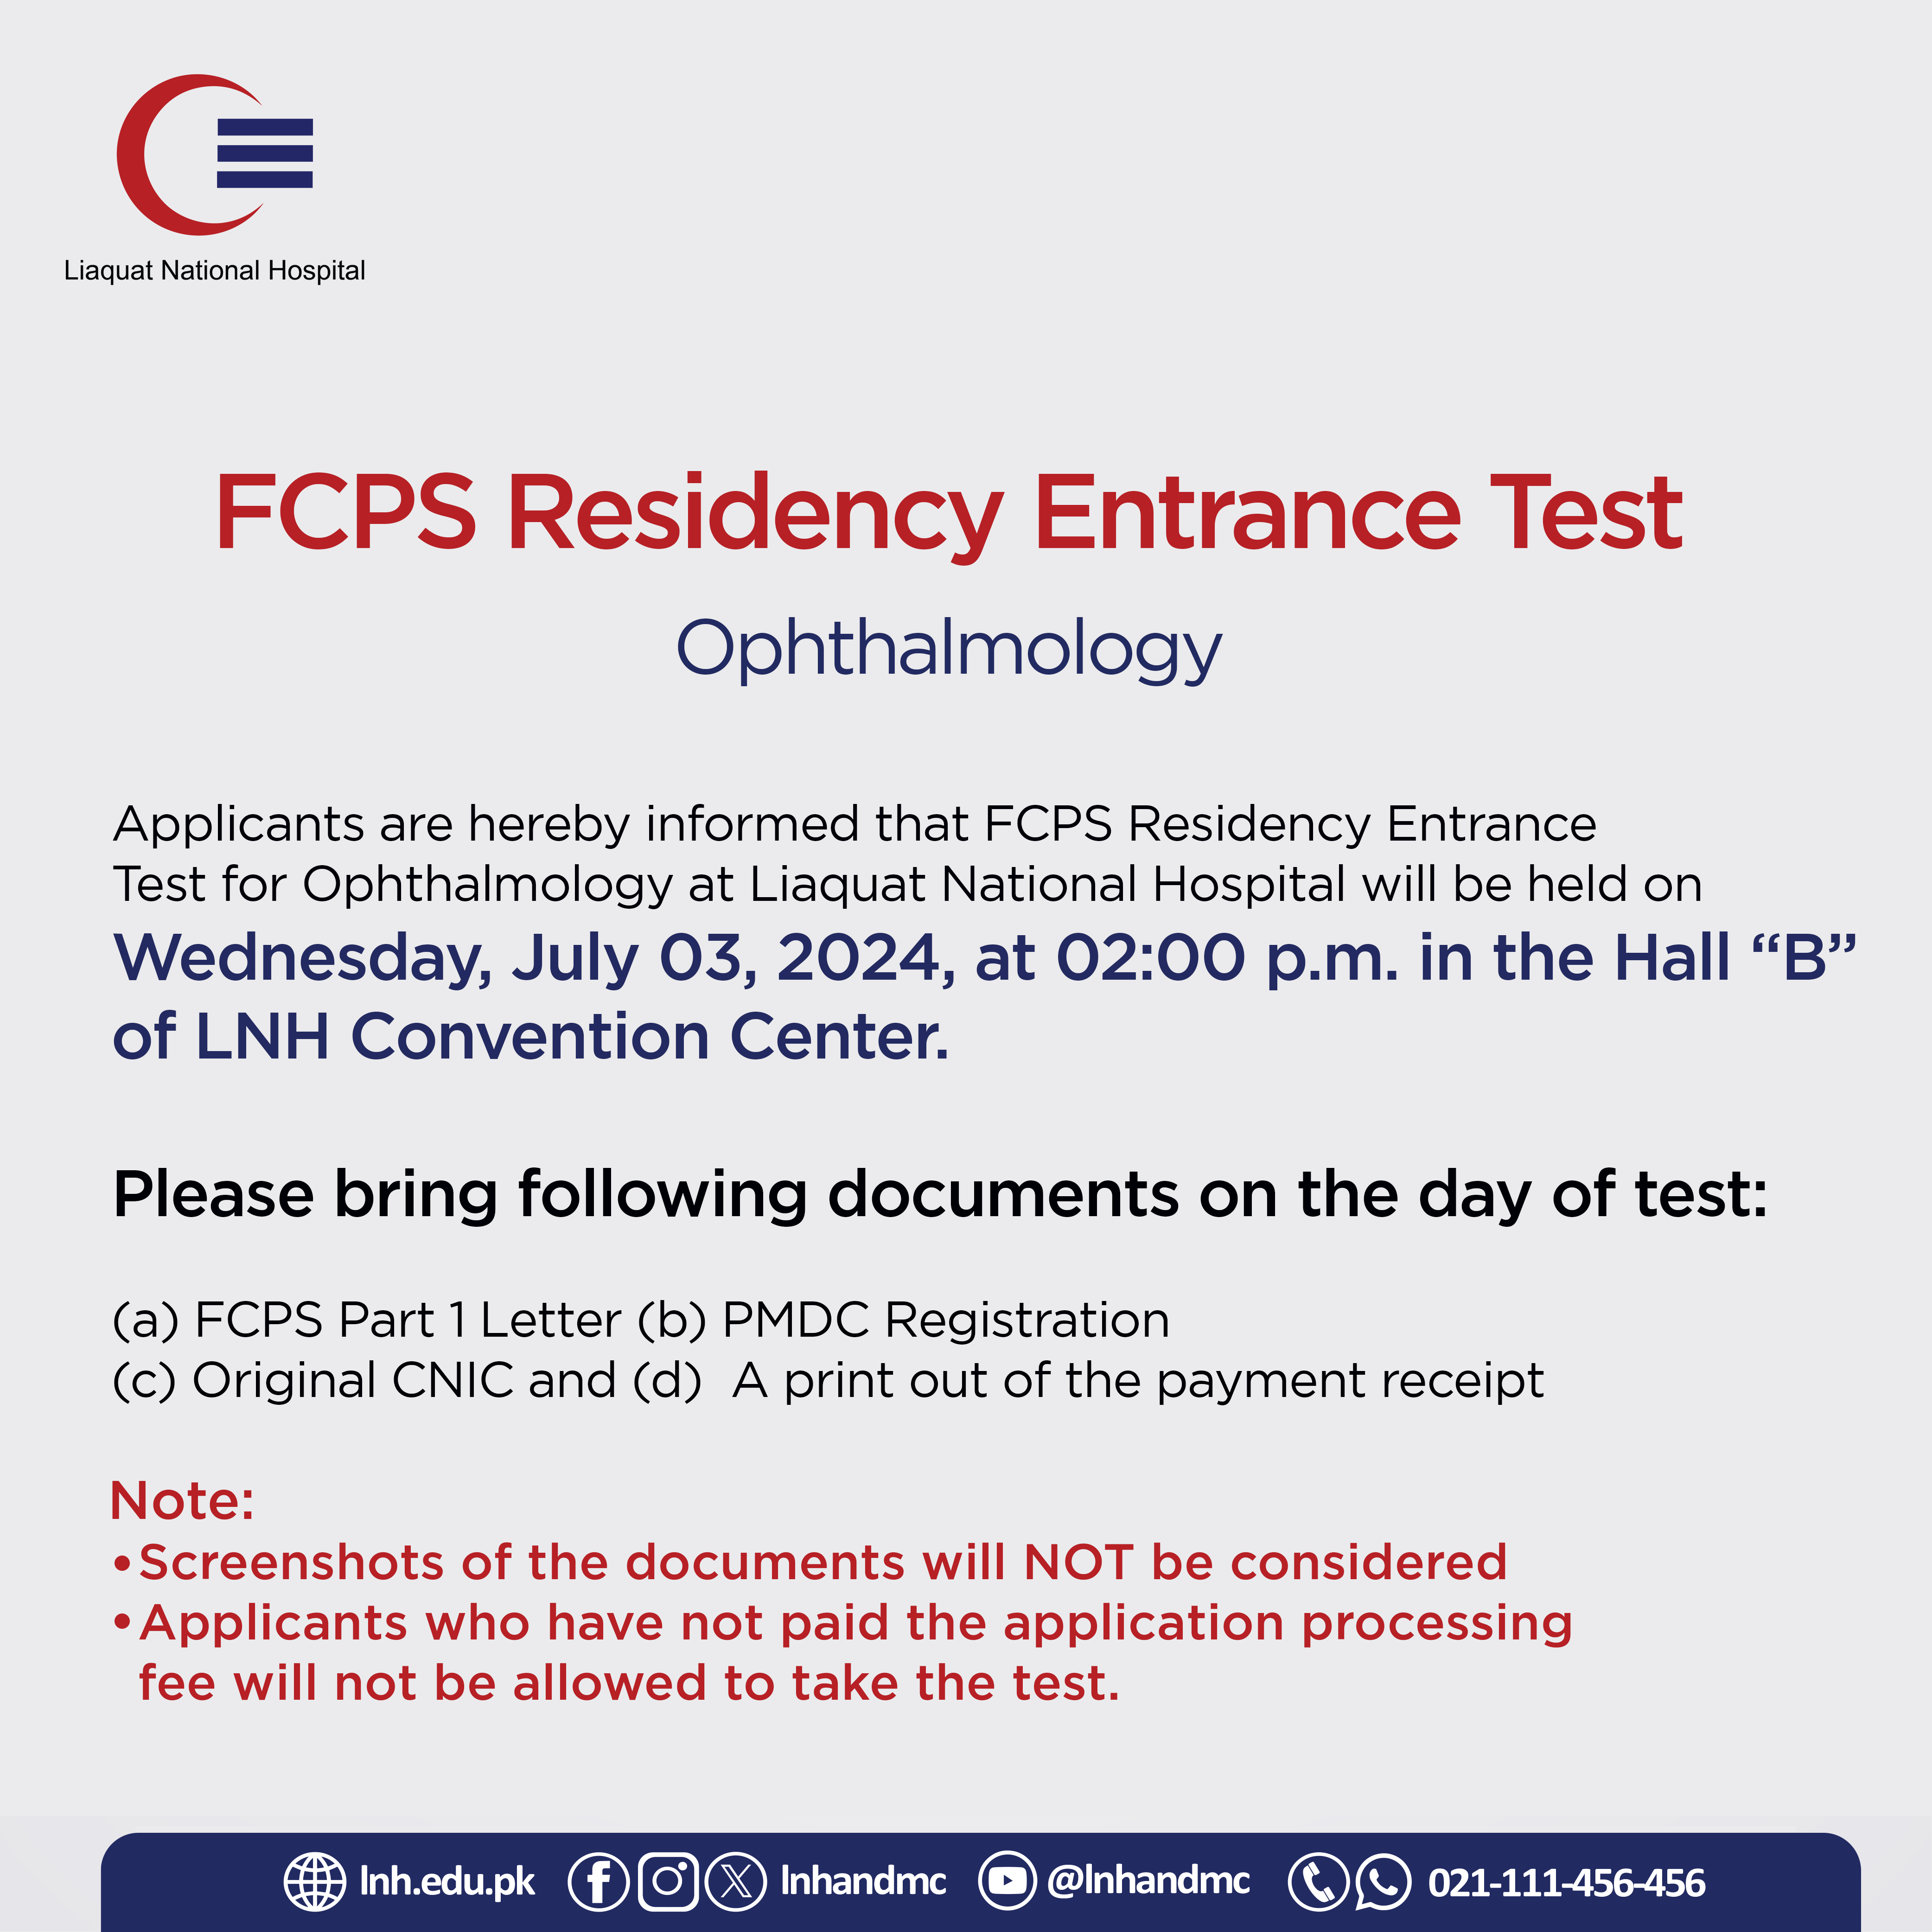 FCPS Residency Entrance Test for Ophthalmology